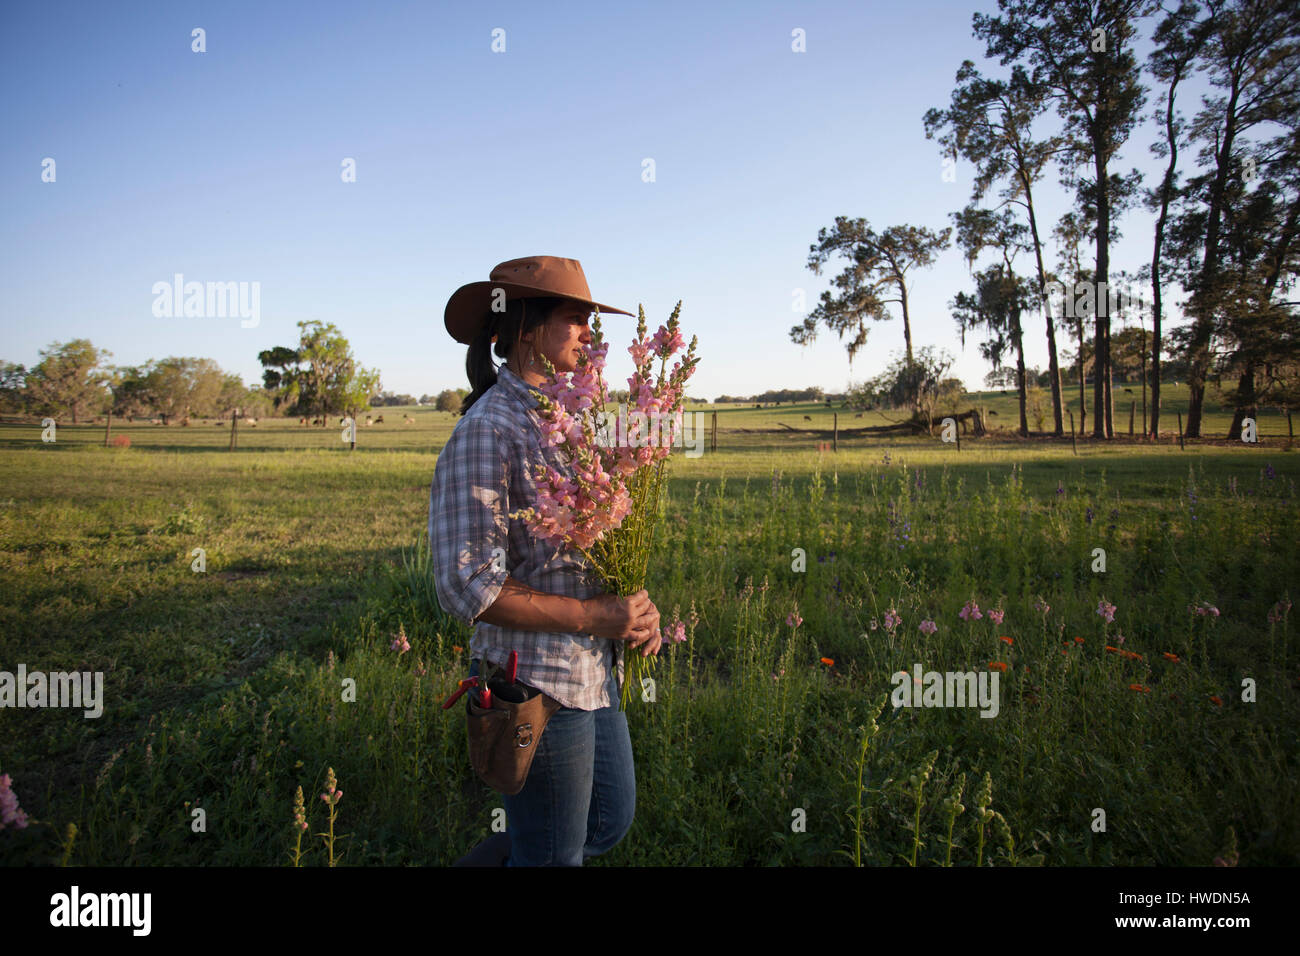 Young woman carrying bunch of snapdragons (antirrhinum) from flower farm field Stock Photo